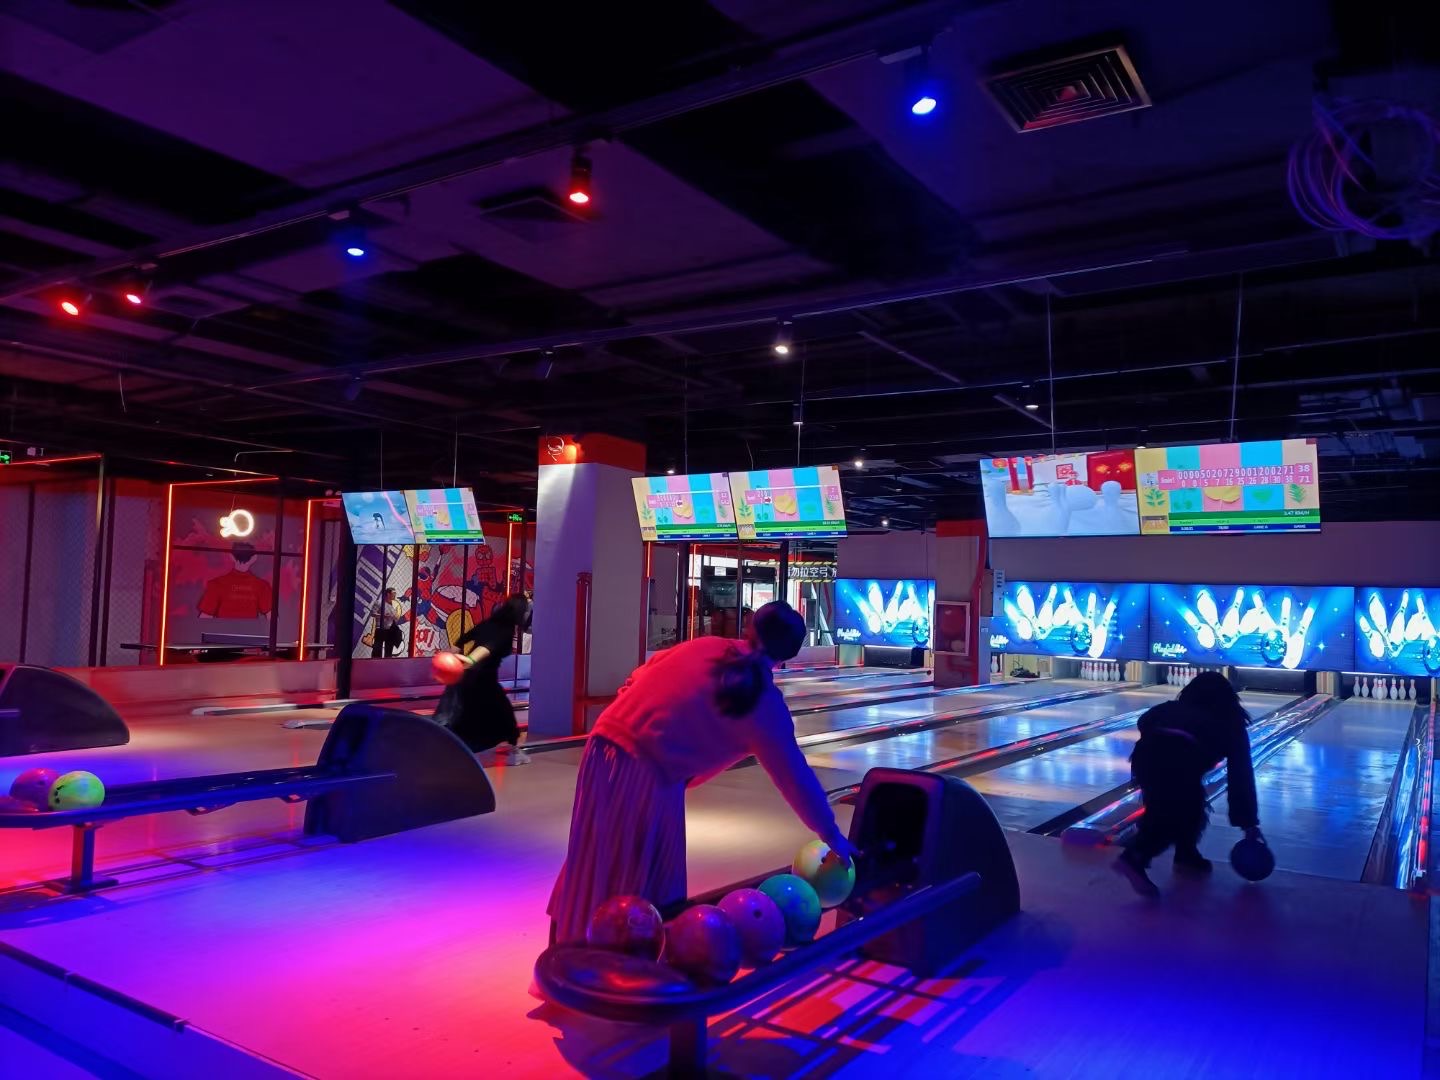 Why choose Xiangshuo as your bowling alley equipment supplier?